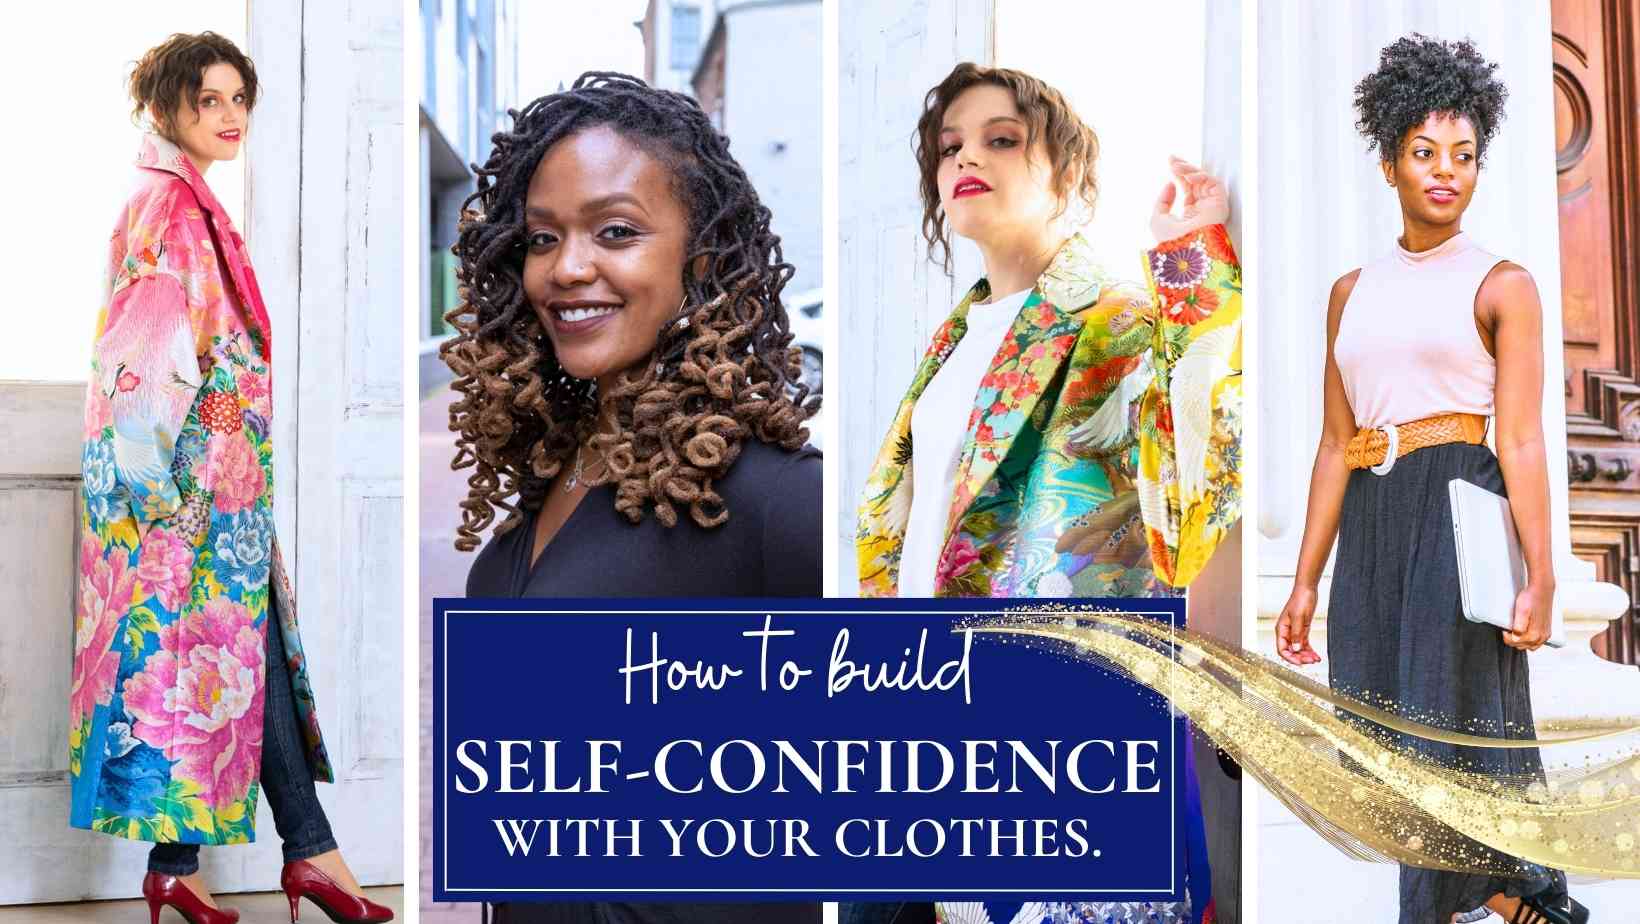 How To Build Self-Confidence With Your Clothes - 7 Ultimate Steps